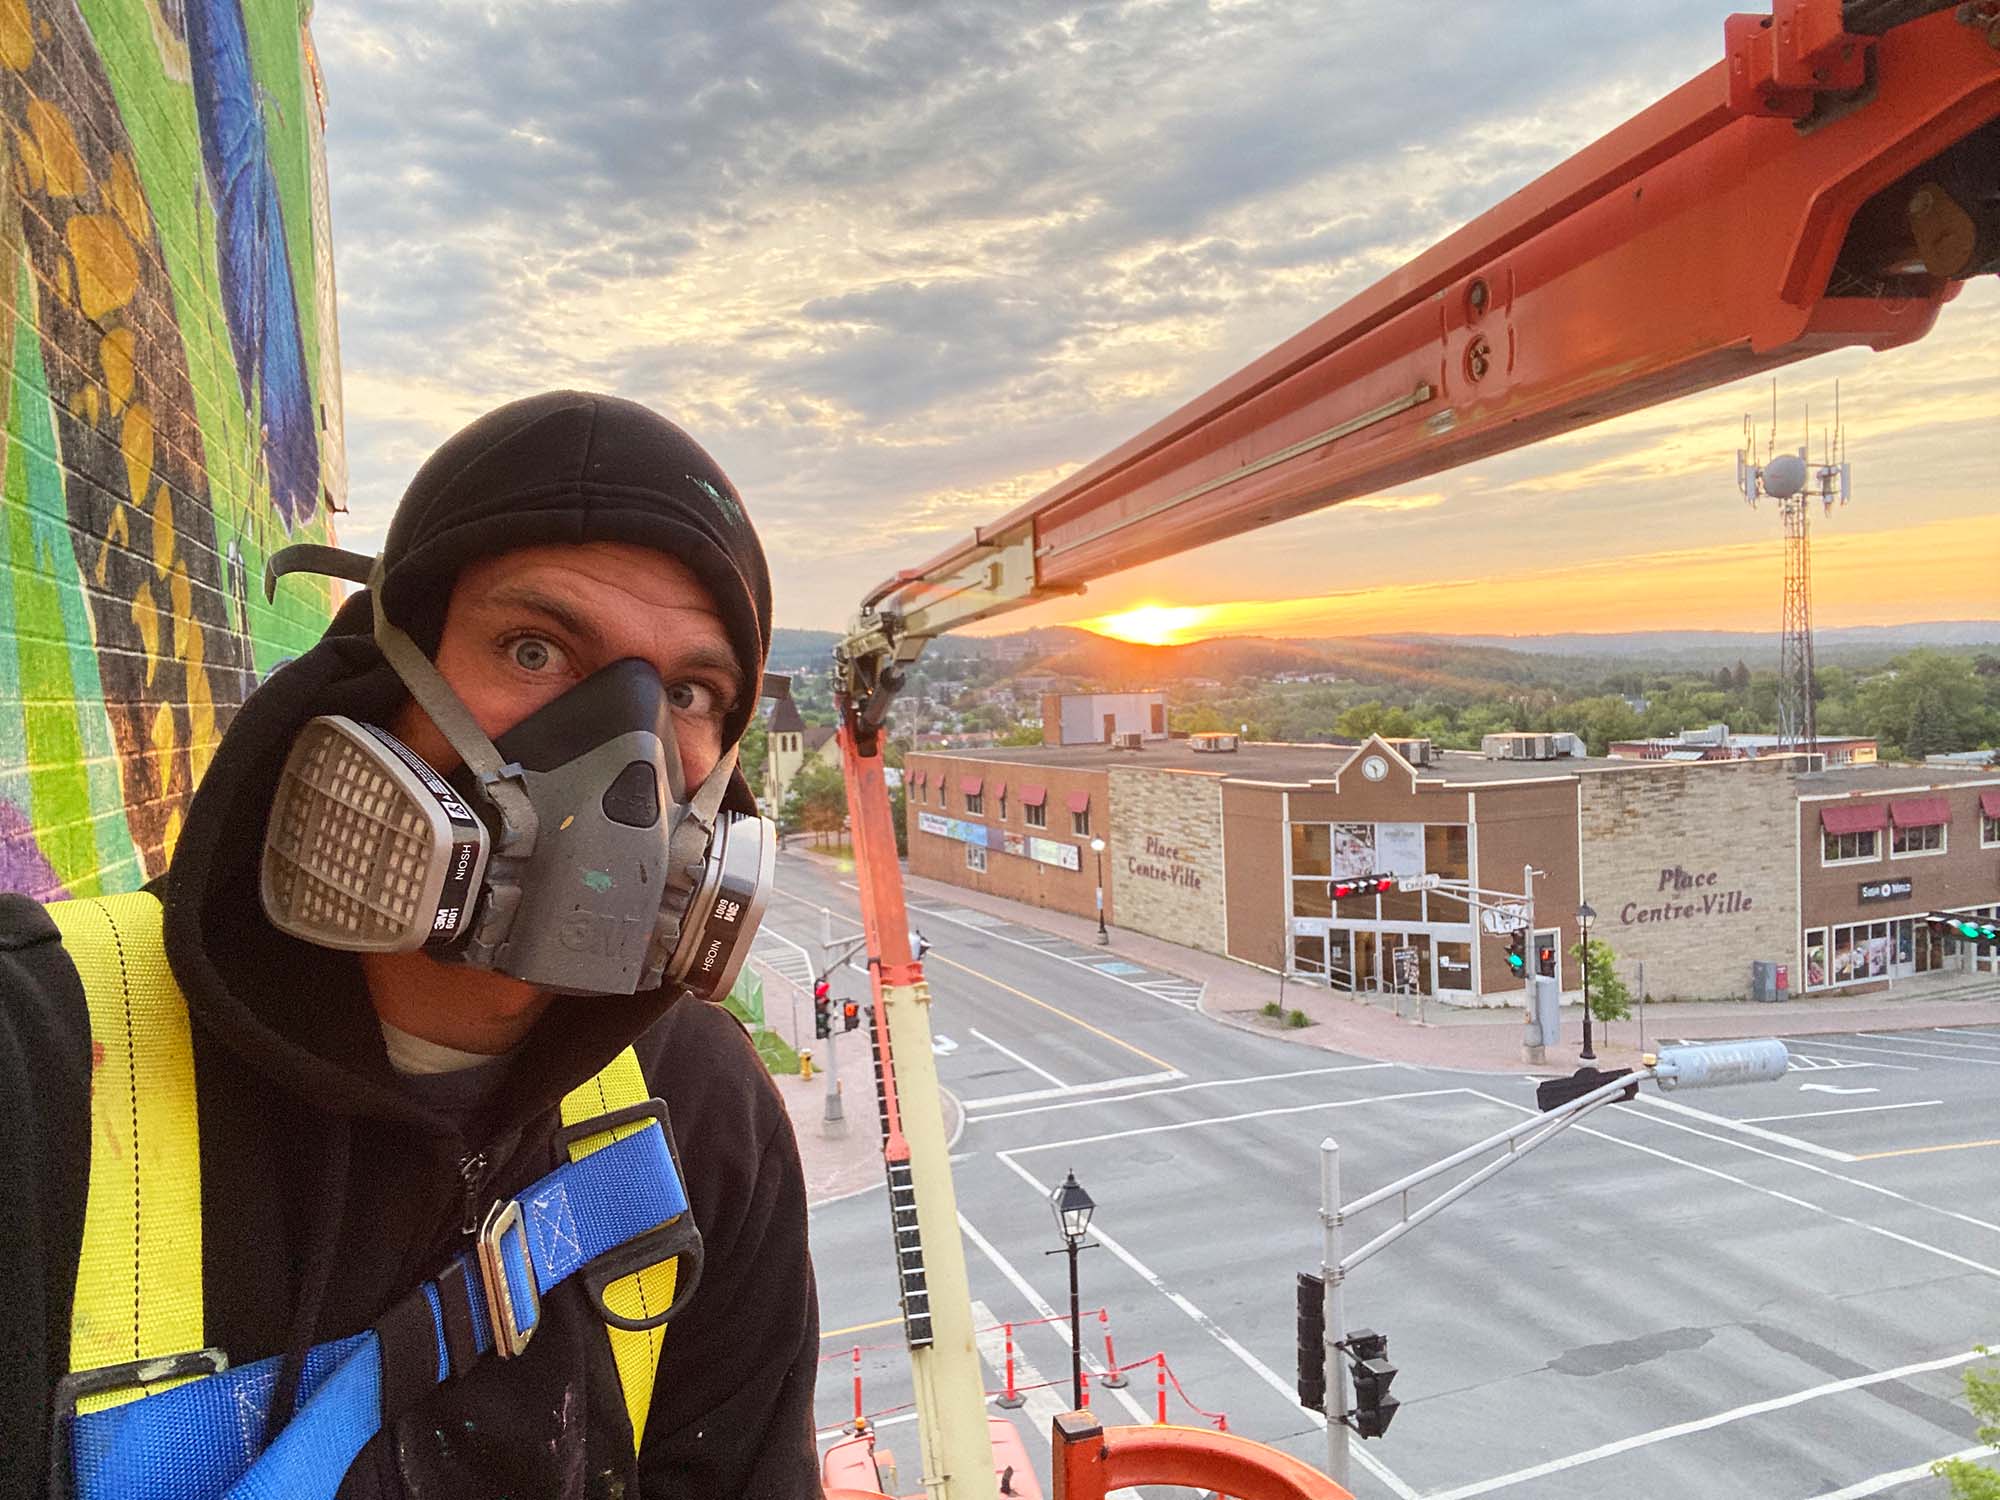 Selfie of a person wearing a respirator high above a city intersection at sunset